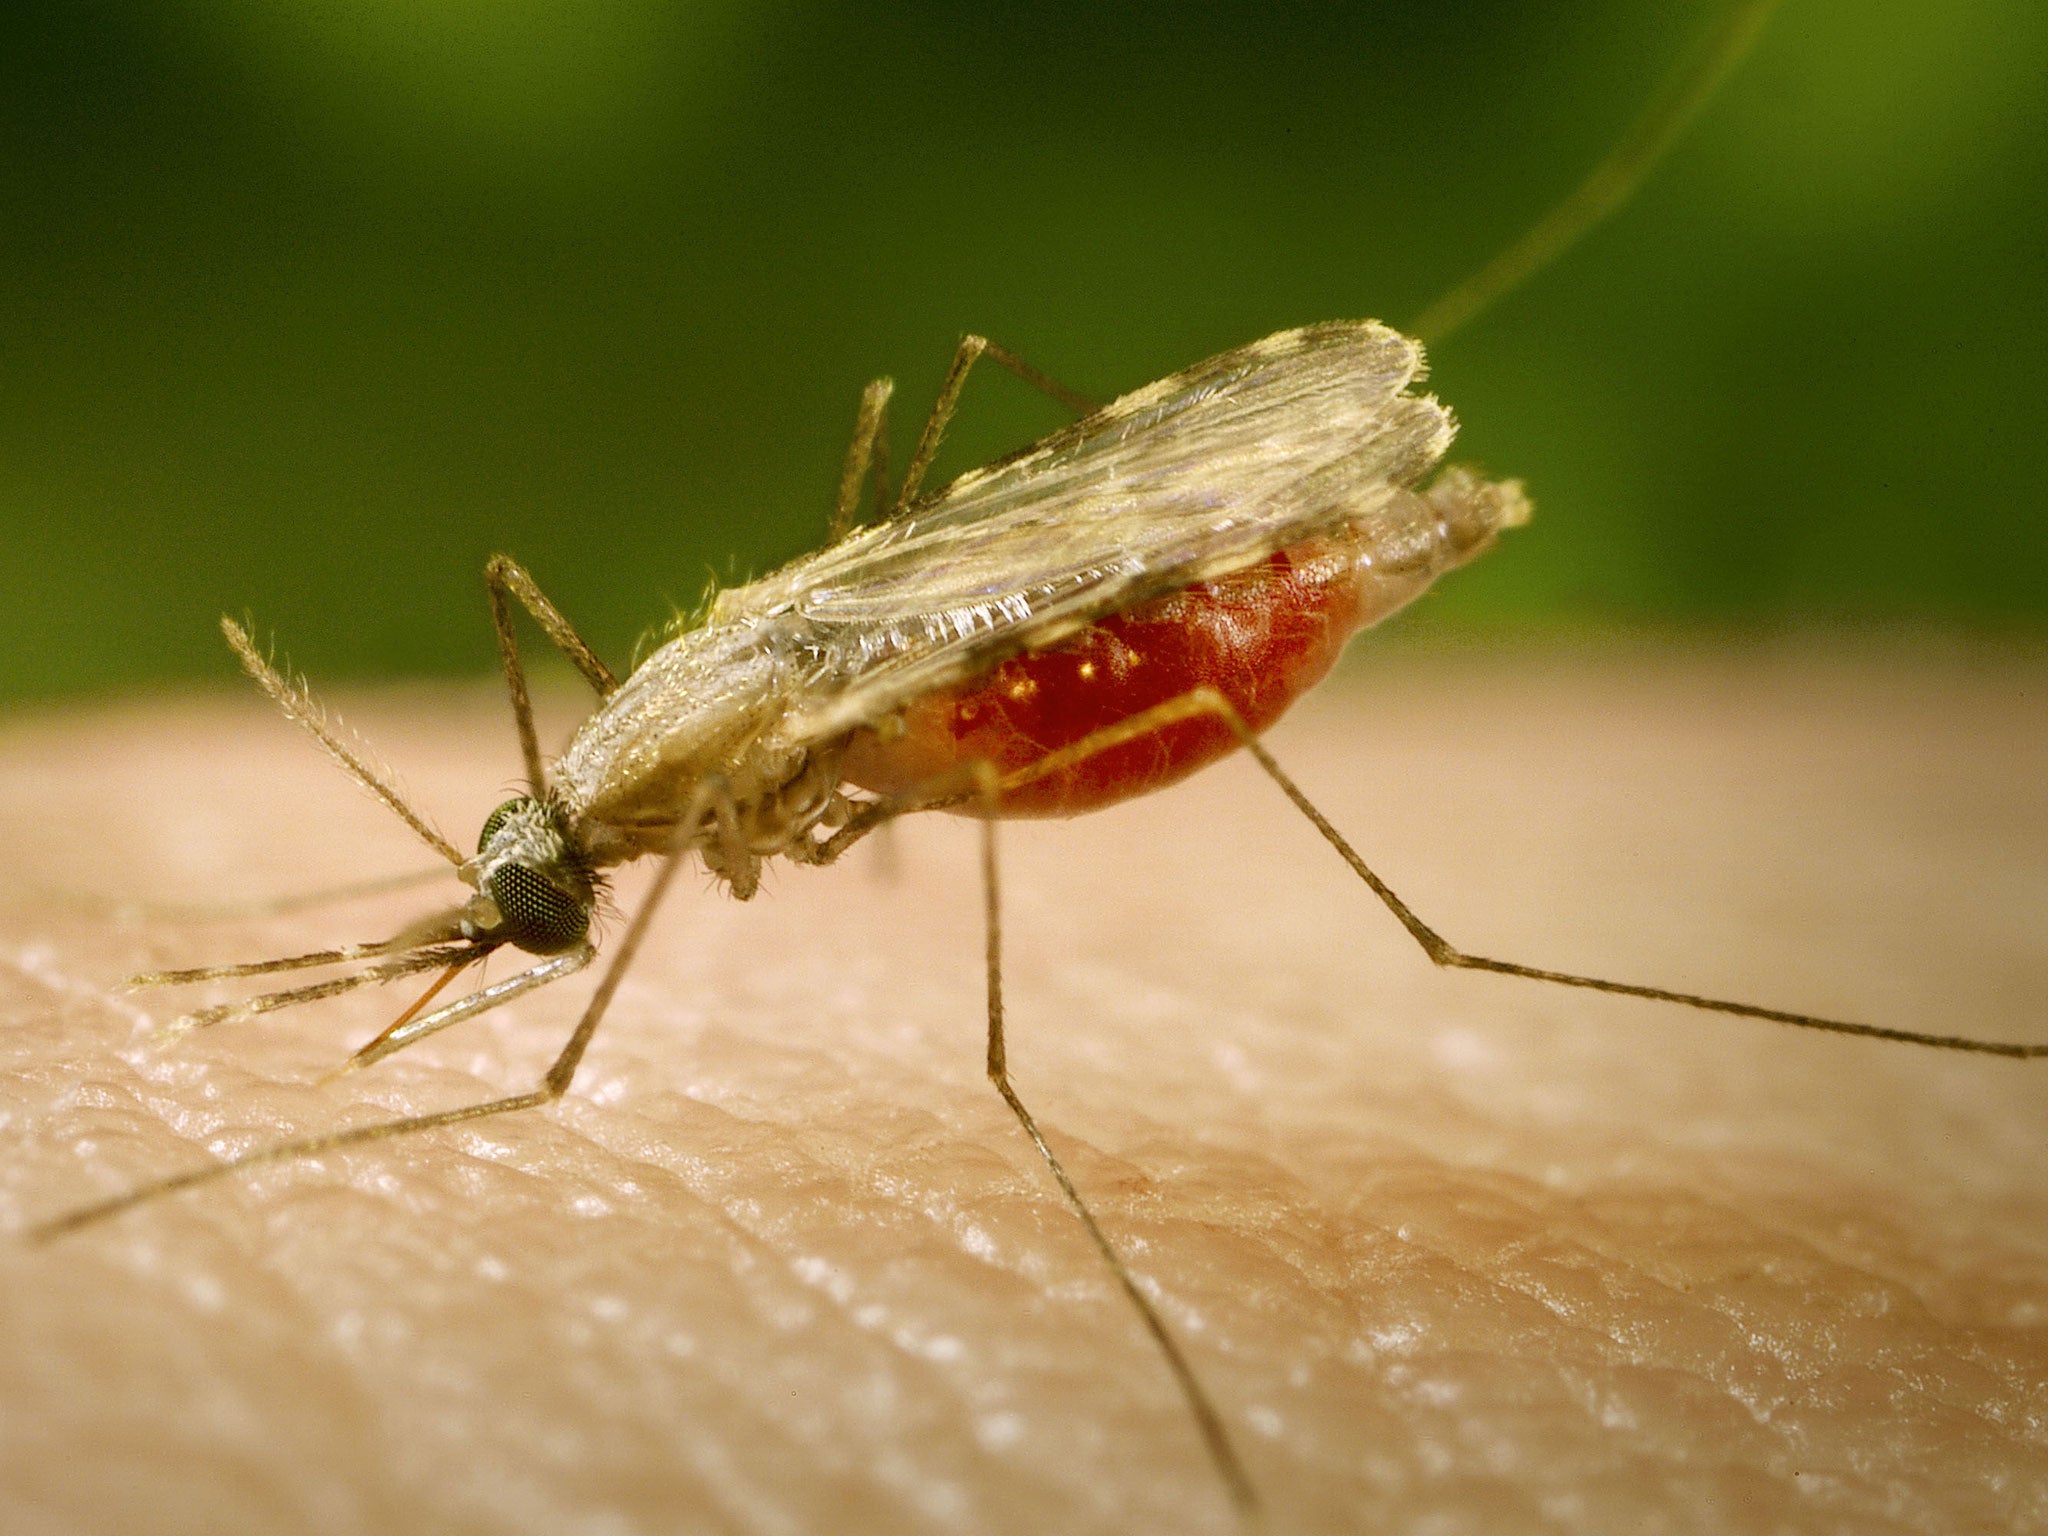 The world's first malaria vaccine could be introduced by 2015, after UK drug company GlaxoSmithKline conducted a trial that reduced cases of the disease in young children